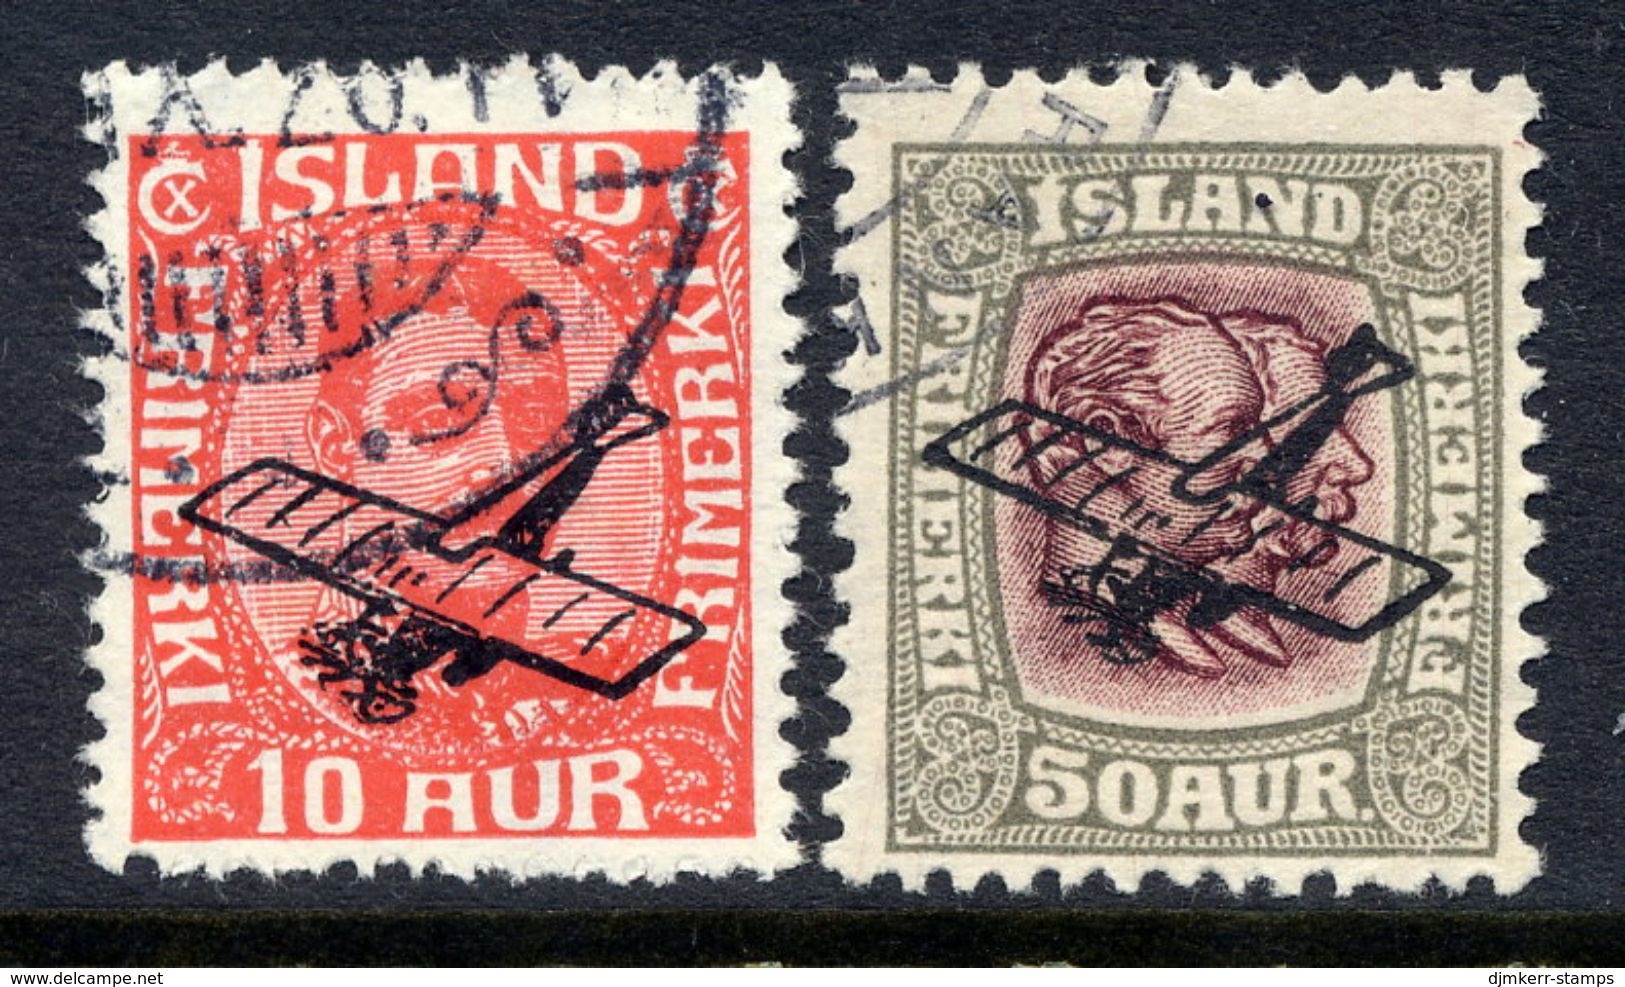 ICELAND 1928-29 Airmail Overprints, Used.  Michel 122-23 - Poste Aérienne